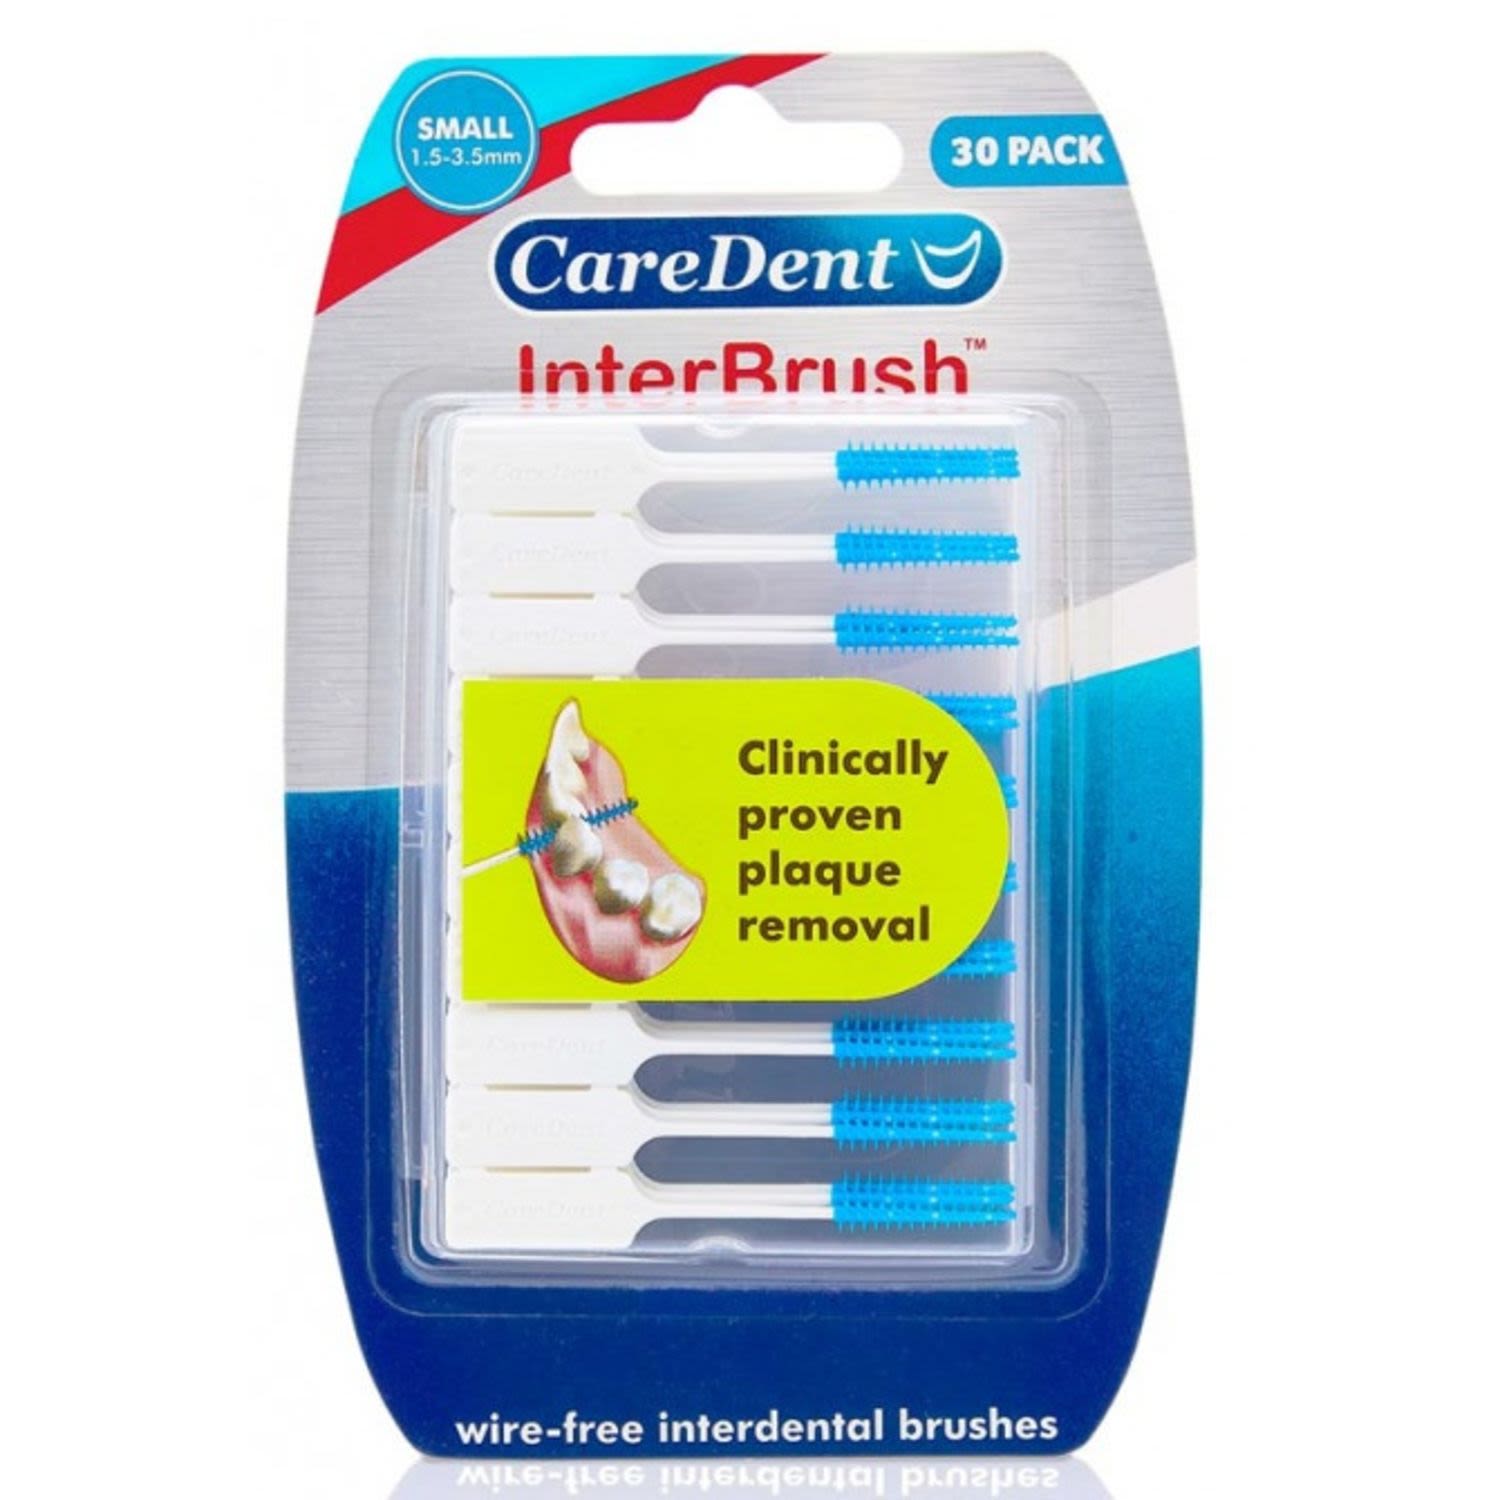 Caredent Interbrush Small, 30 Each